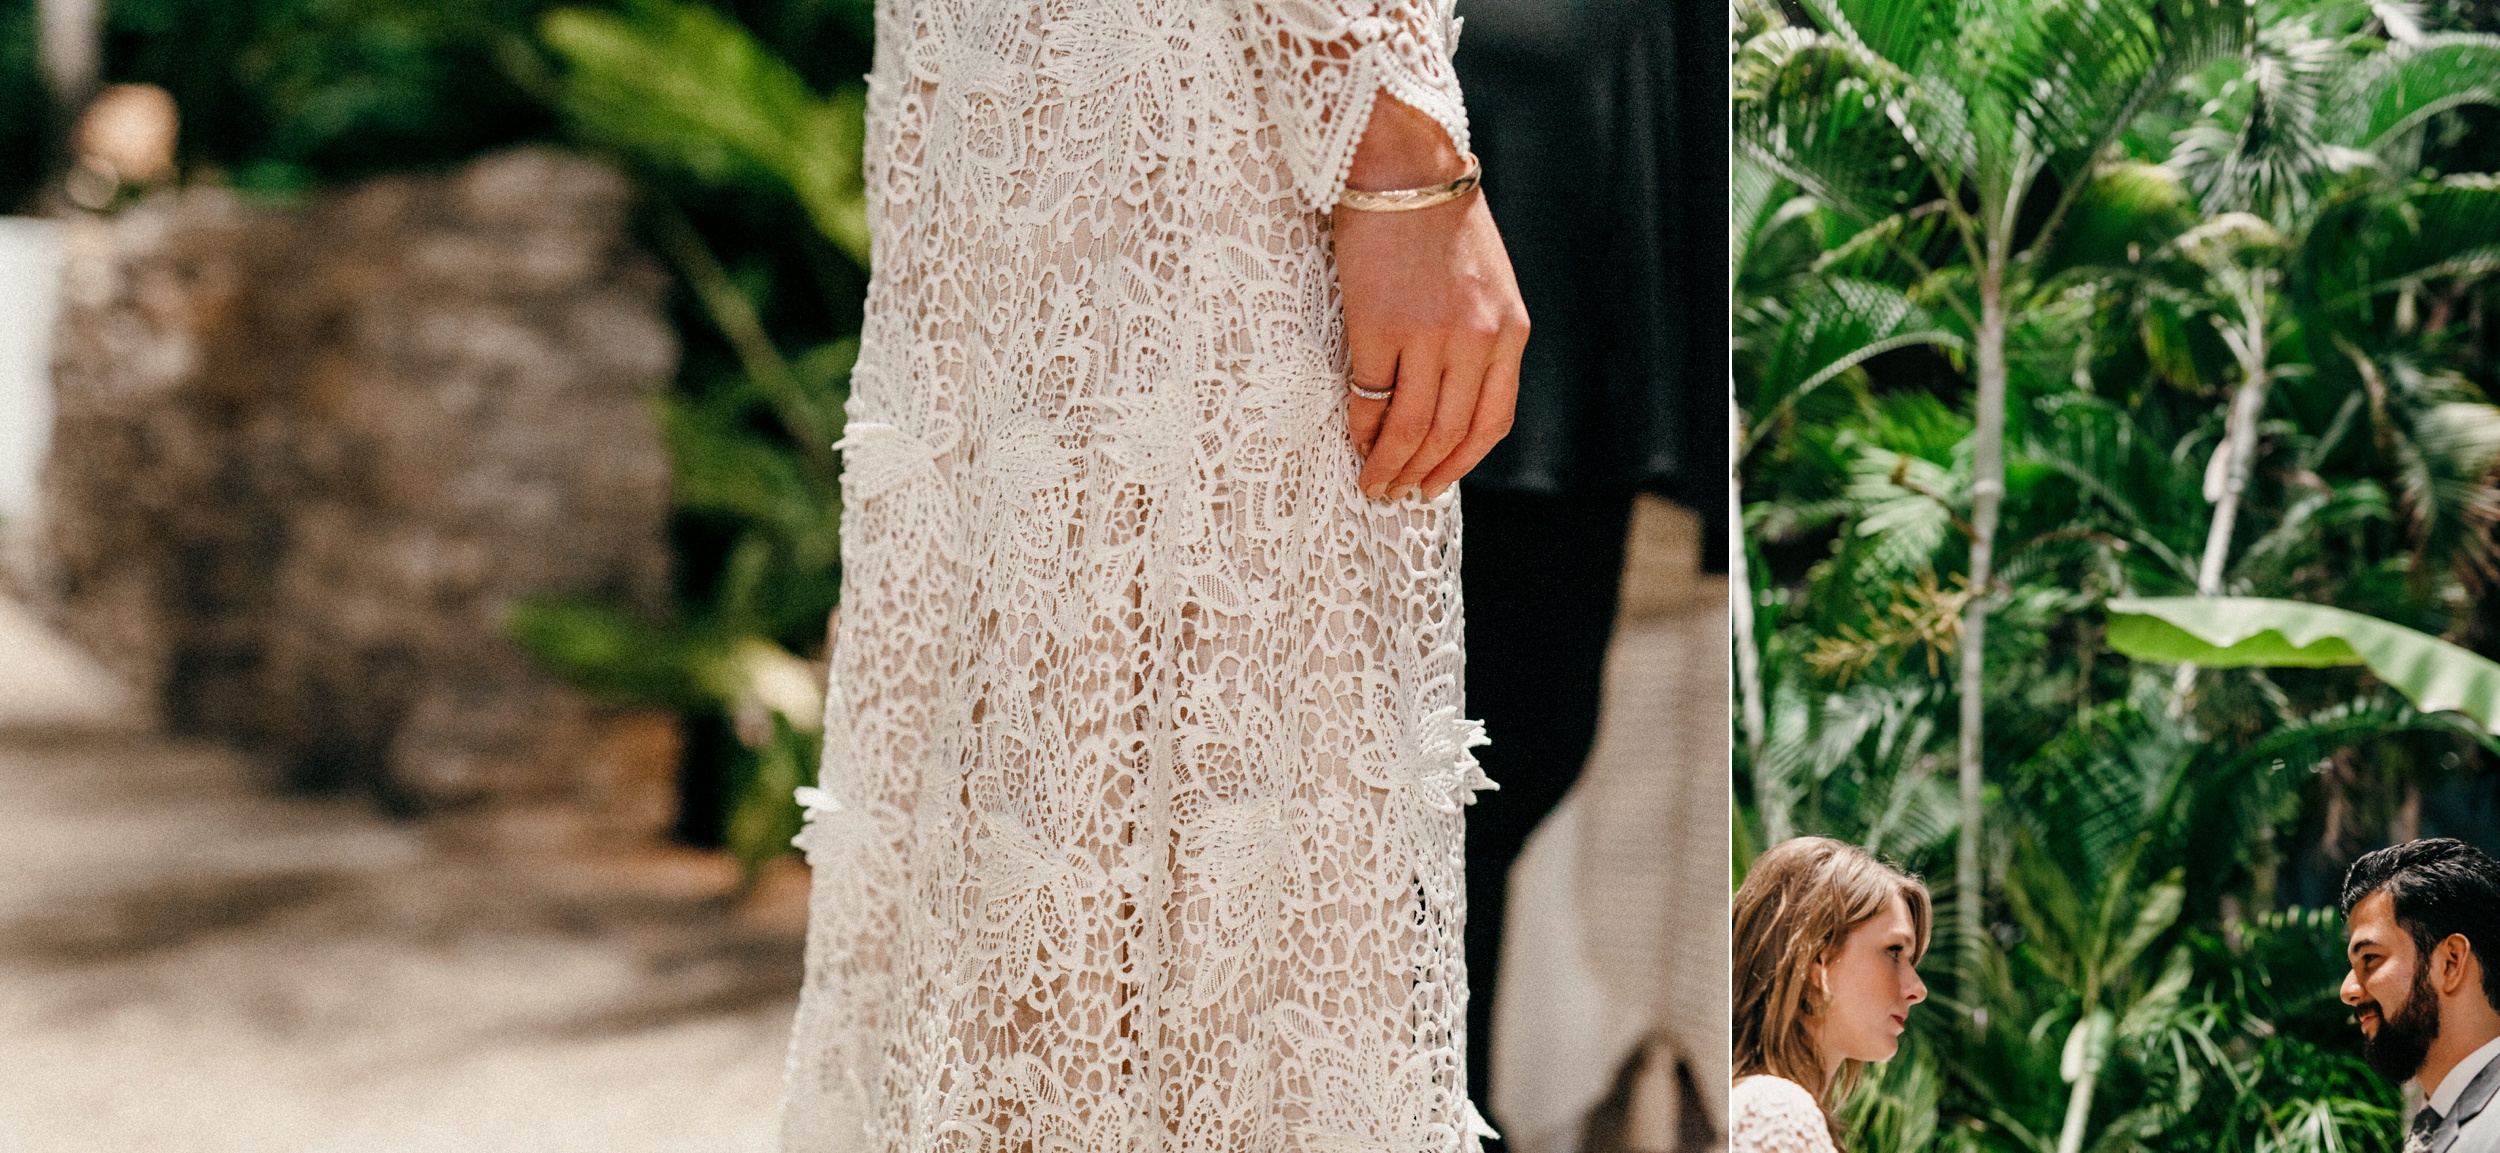 Small Intimate Floral Wedding with a Simple Delicate Gown in Des Moines, IA Botanical Garden